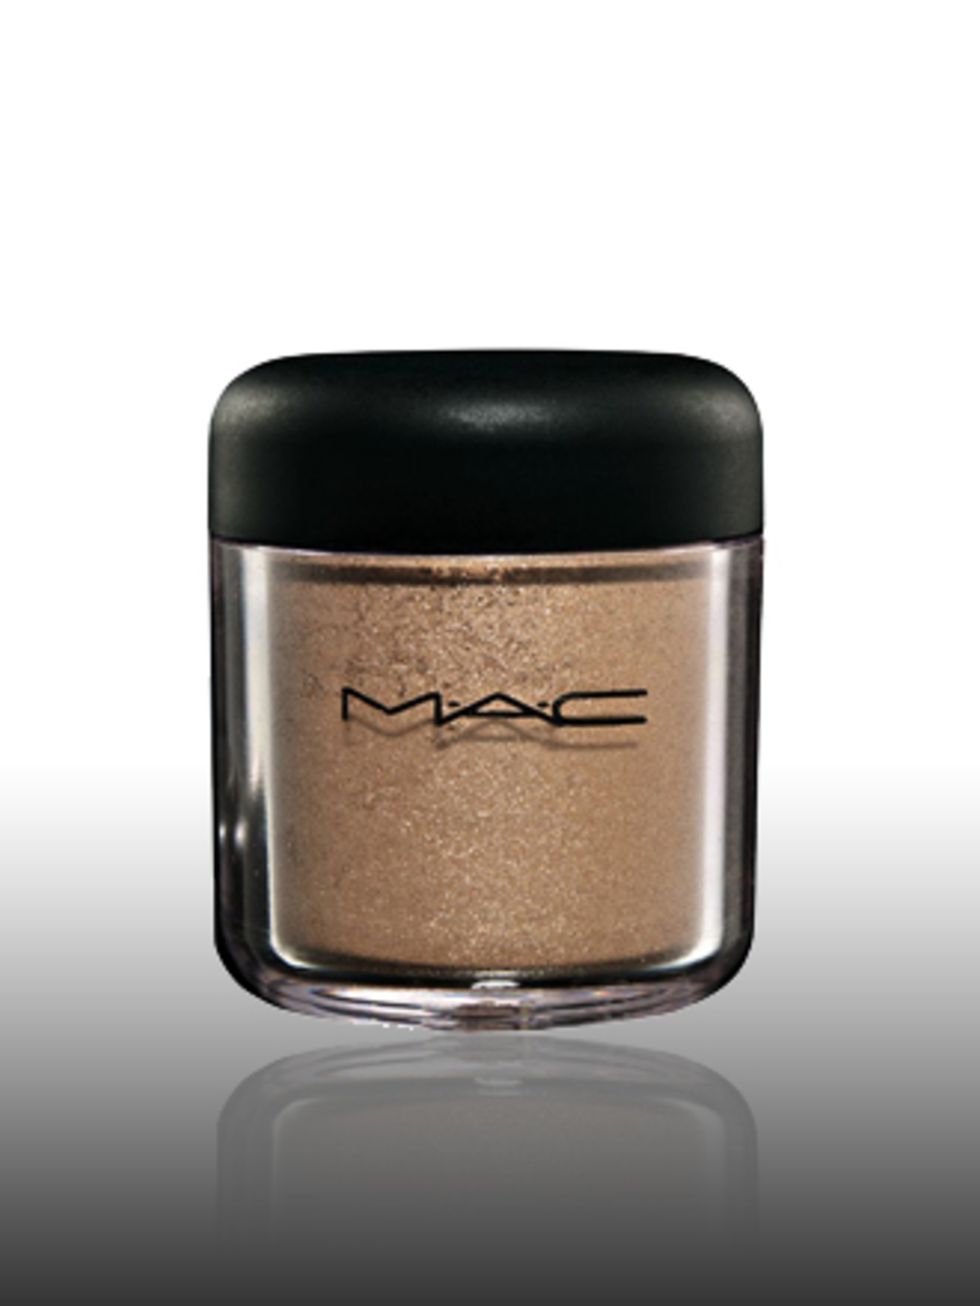 <p>Pigment in Over Rich, £15 by <a href="http://www.maccosmetics.co.uk/">Mac</a> </p><p>Bronze, copper and gold are the look du jour for eyes this season. This is a good way to update your smoky eye look.</p>